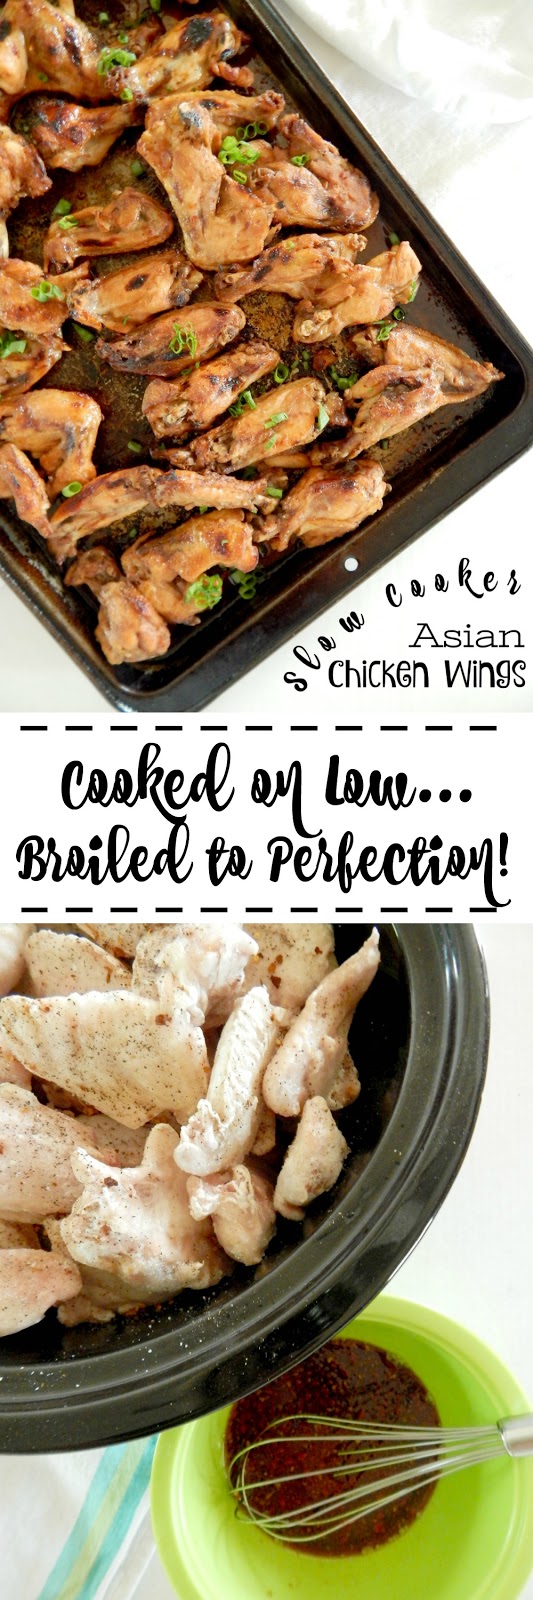 Slow Cooker Asian Chicken Wings...cooked on LOW in the slow cooker, then broiled to perfection right before eating.  A sweet, spicy sauce gives them a delicious glaze! (sweetandsavoryfood.com)